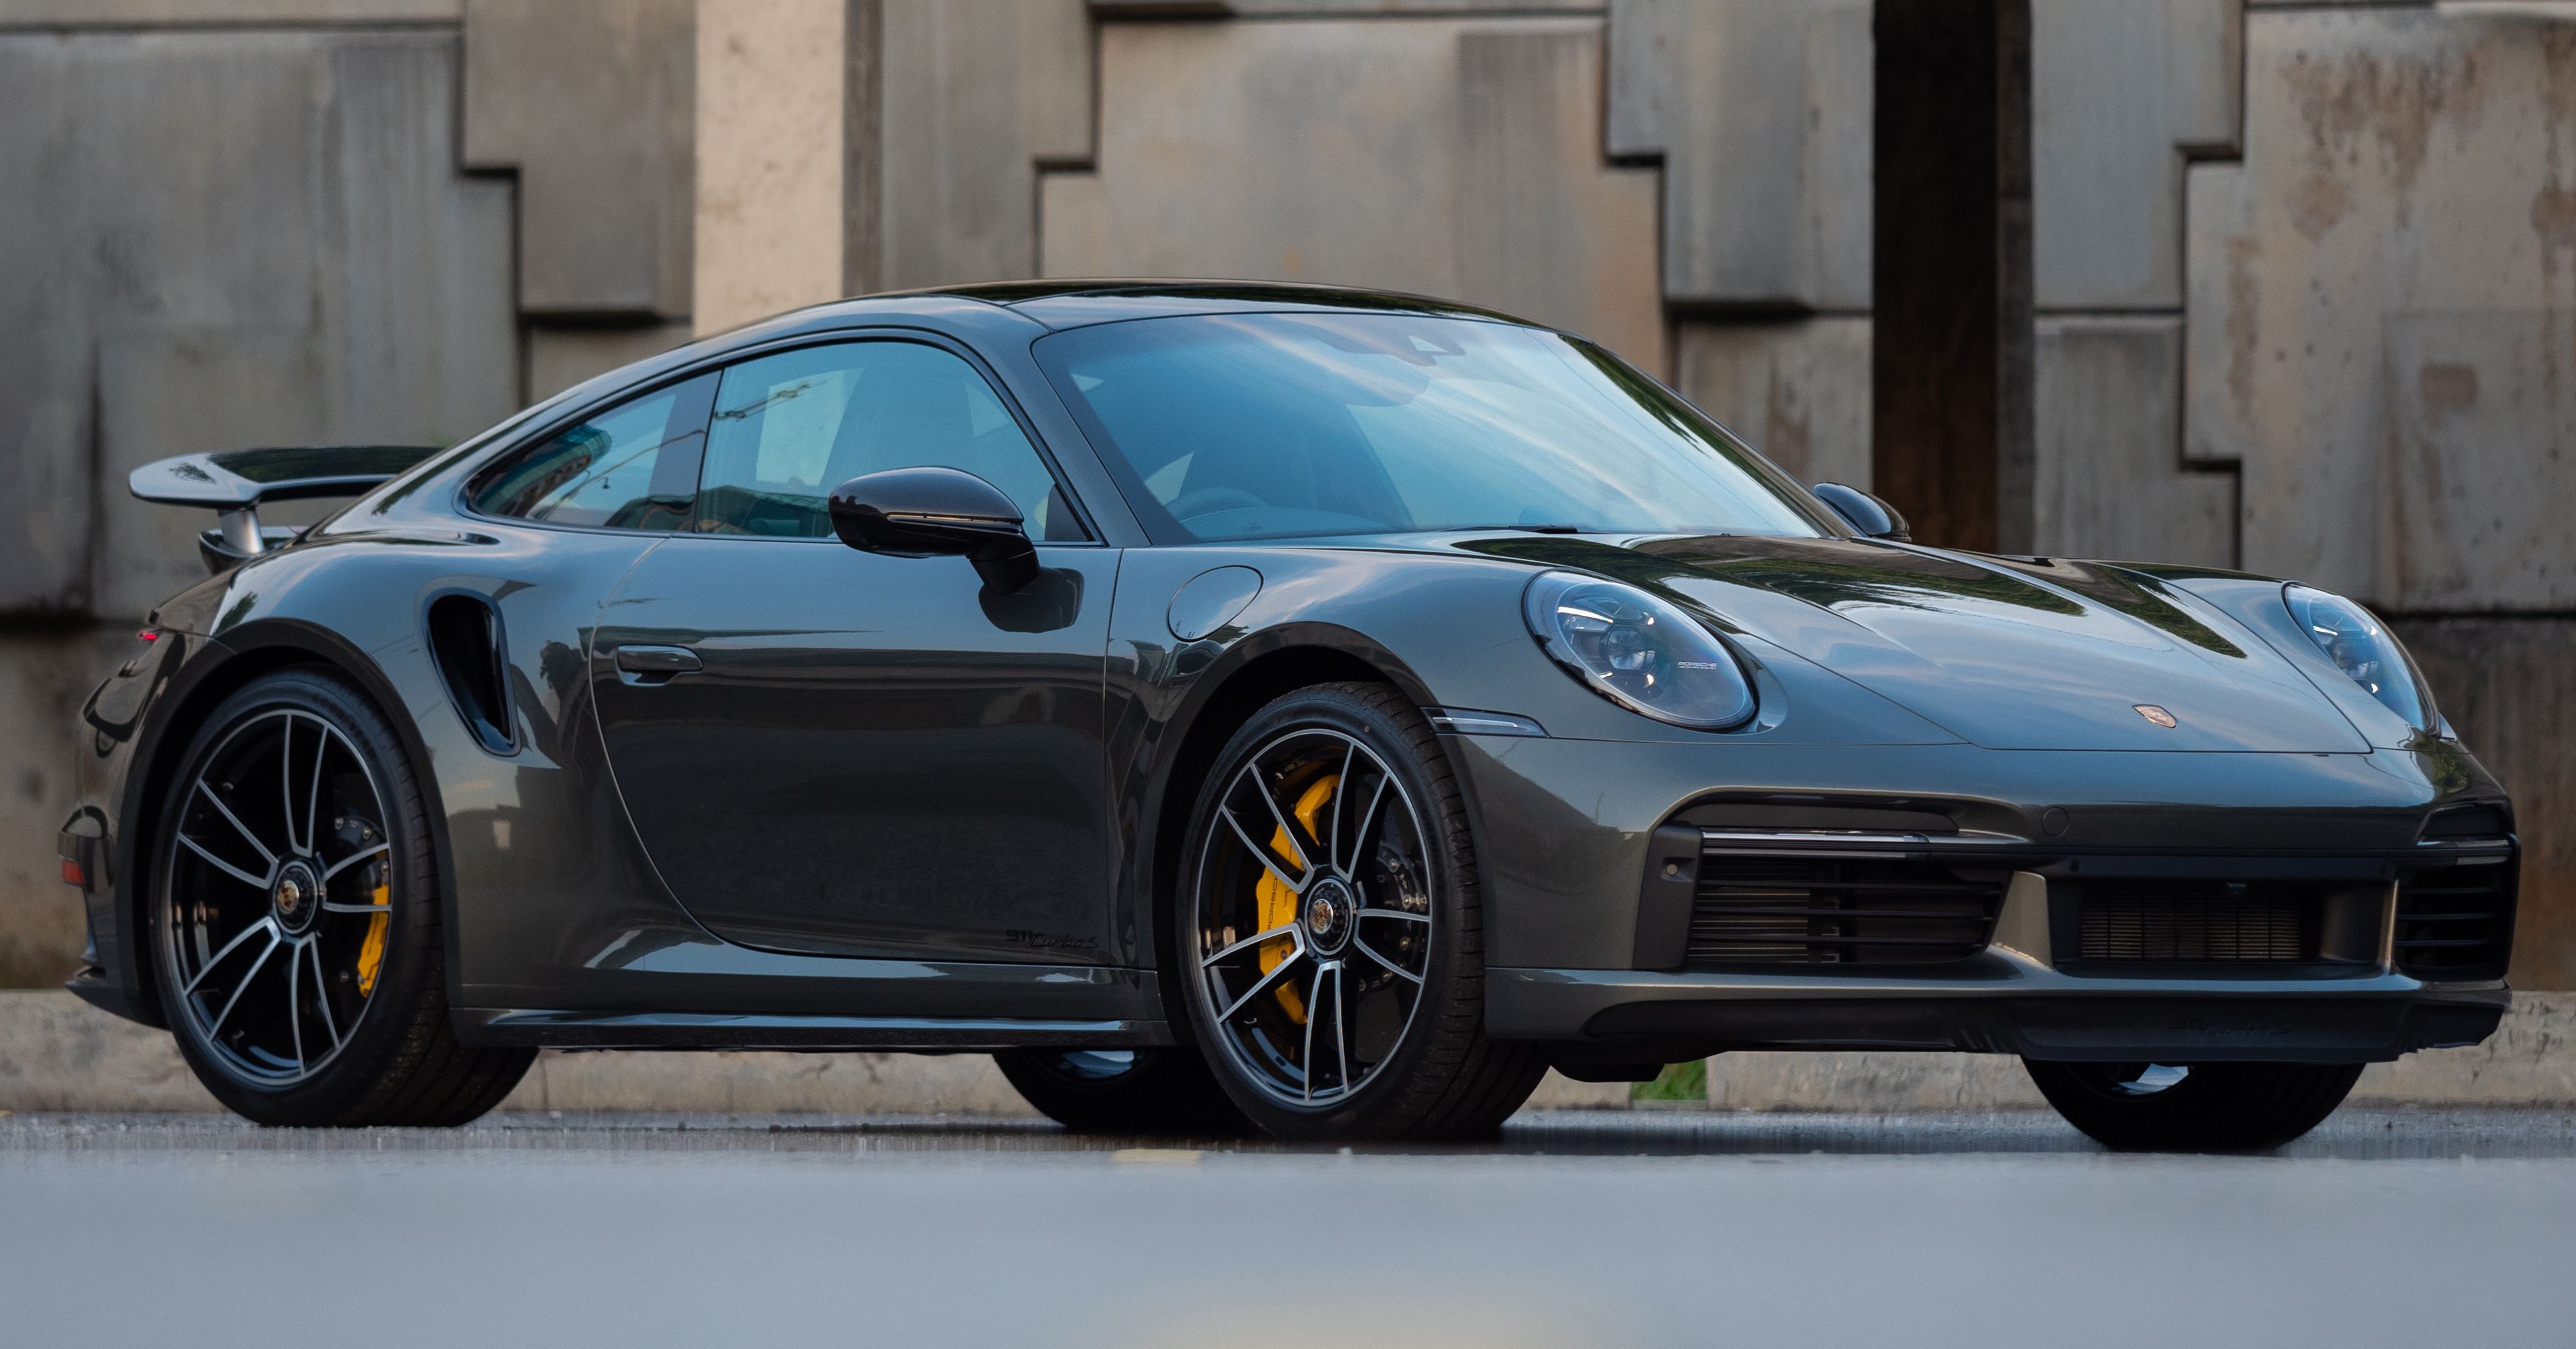 992 Porsche 911 Turbo S launched in Malaysia: 650 PS, 800 Nm, 0-100 km/h in   seconds, from  million 